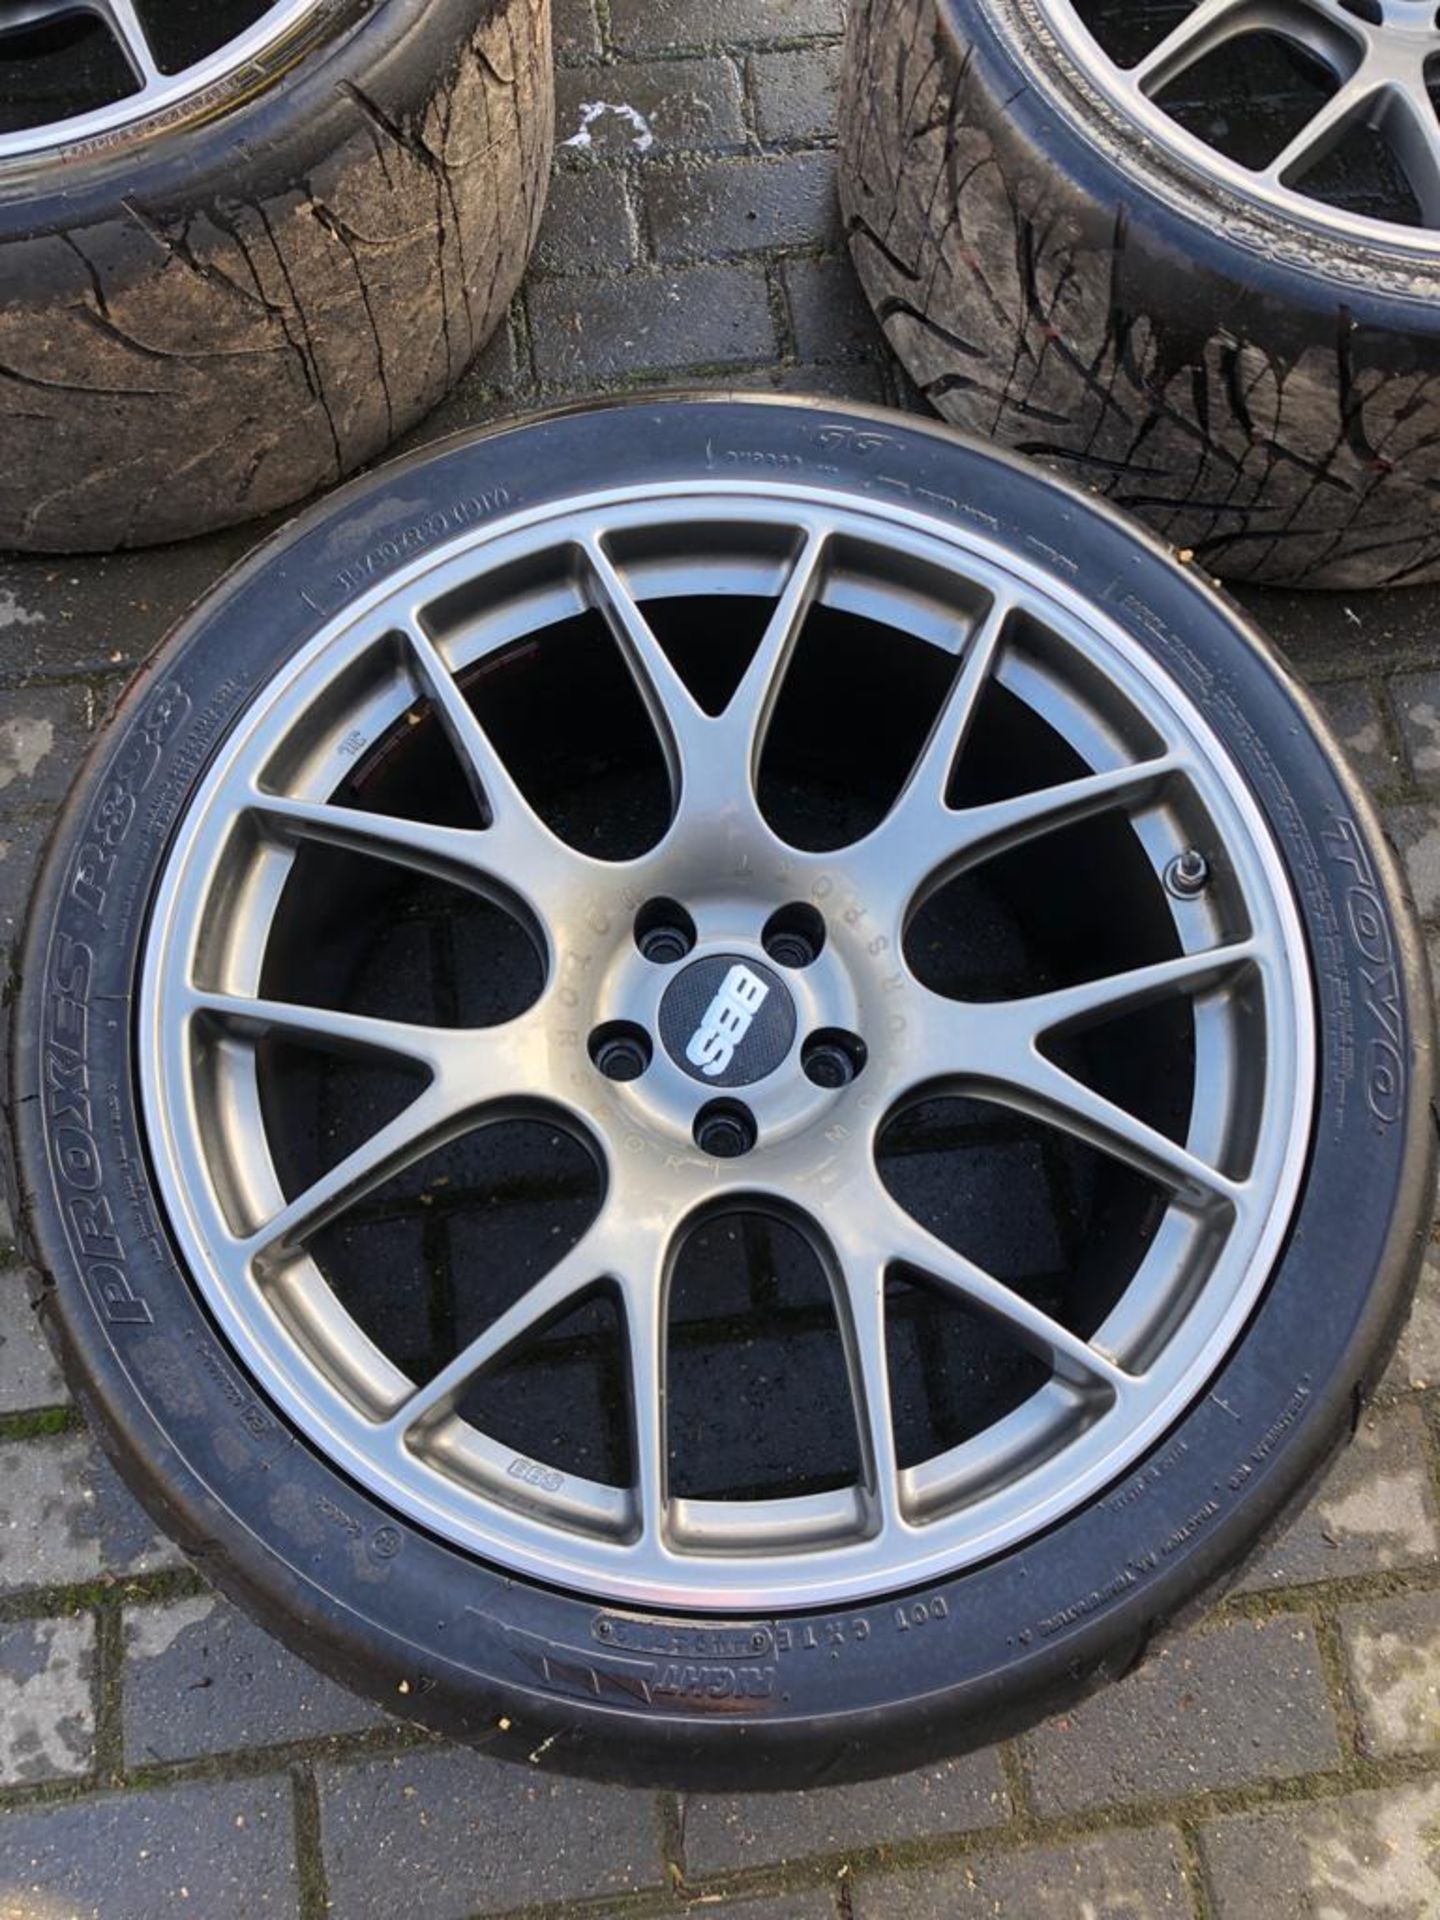 GENUINE BBS CH-R 20" SATIN ANTHRACITE NÜRBURGRING ALLOY WHEELS SET OF 4, TOYO R888 TYRES £3400 NEW - Image 2 of 17